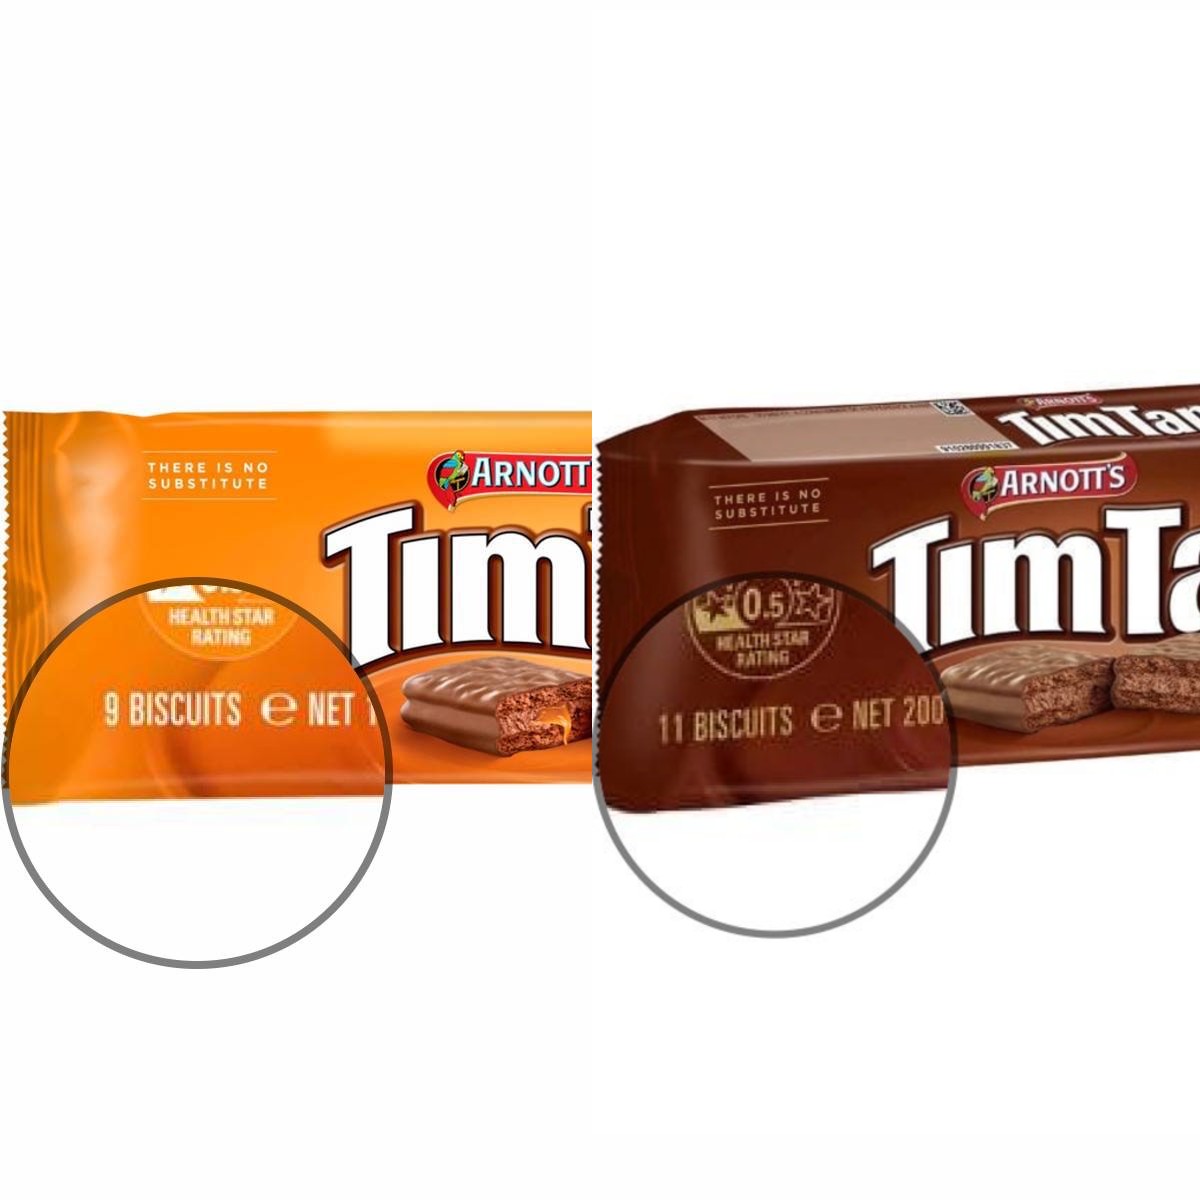 Shock TimTam discovery